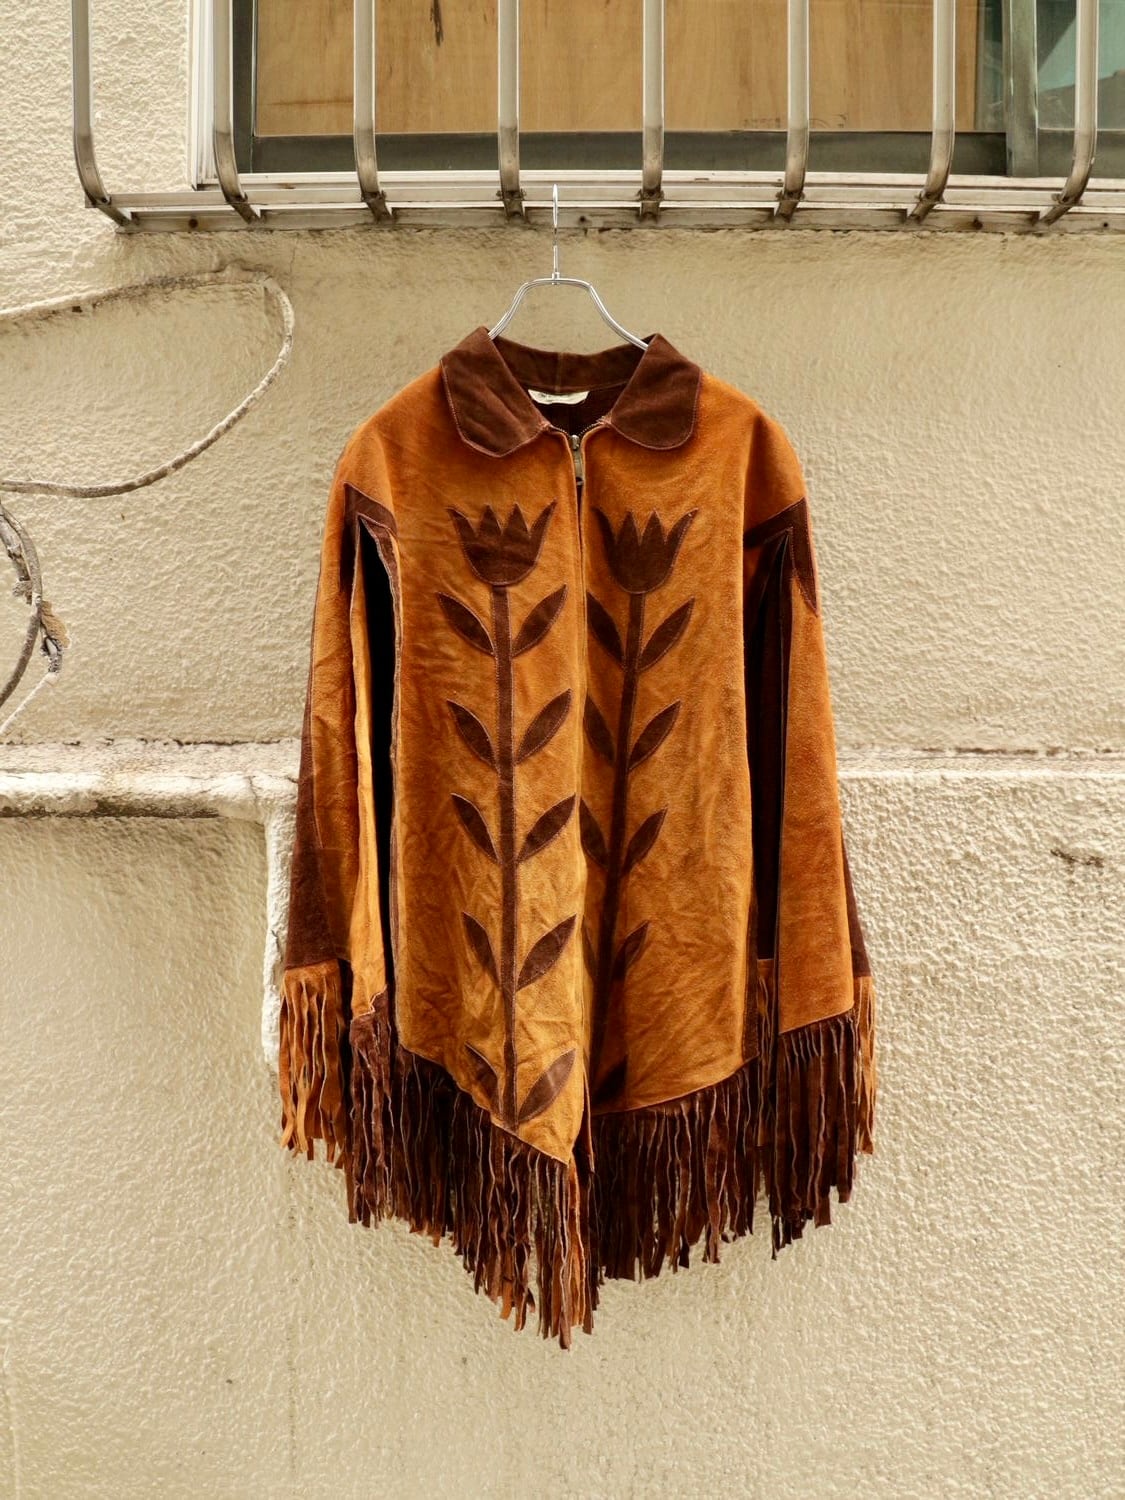 【USED】Vintage Flower Patch Fringe Leather Poncho ヴィンテージフリンジレザーポンチョ